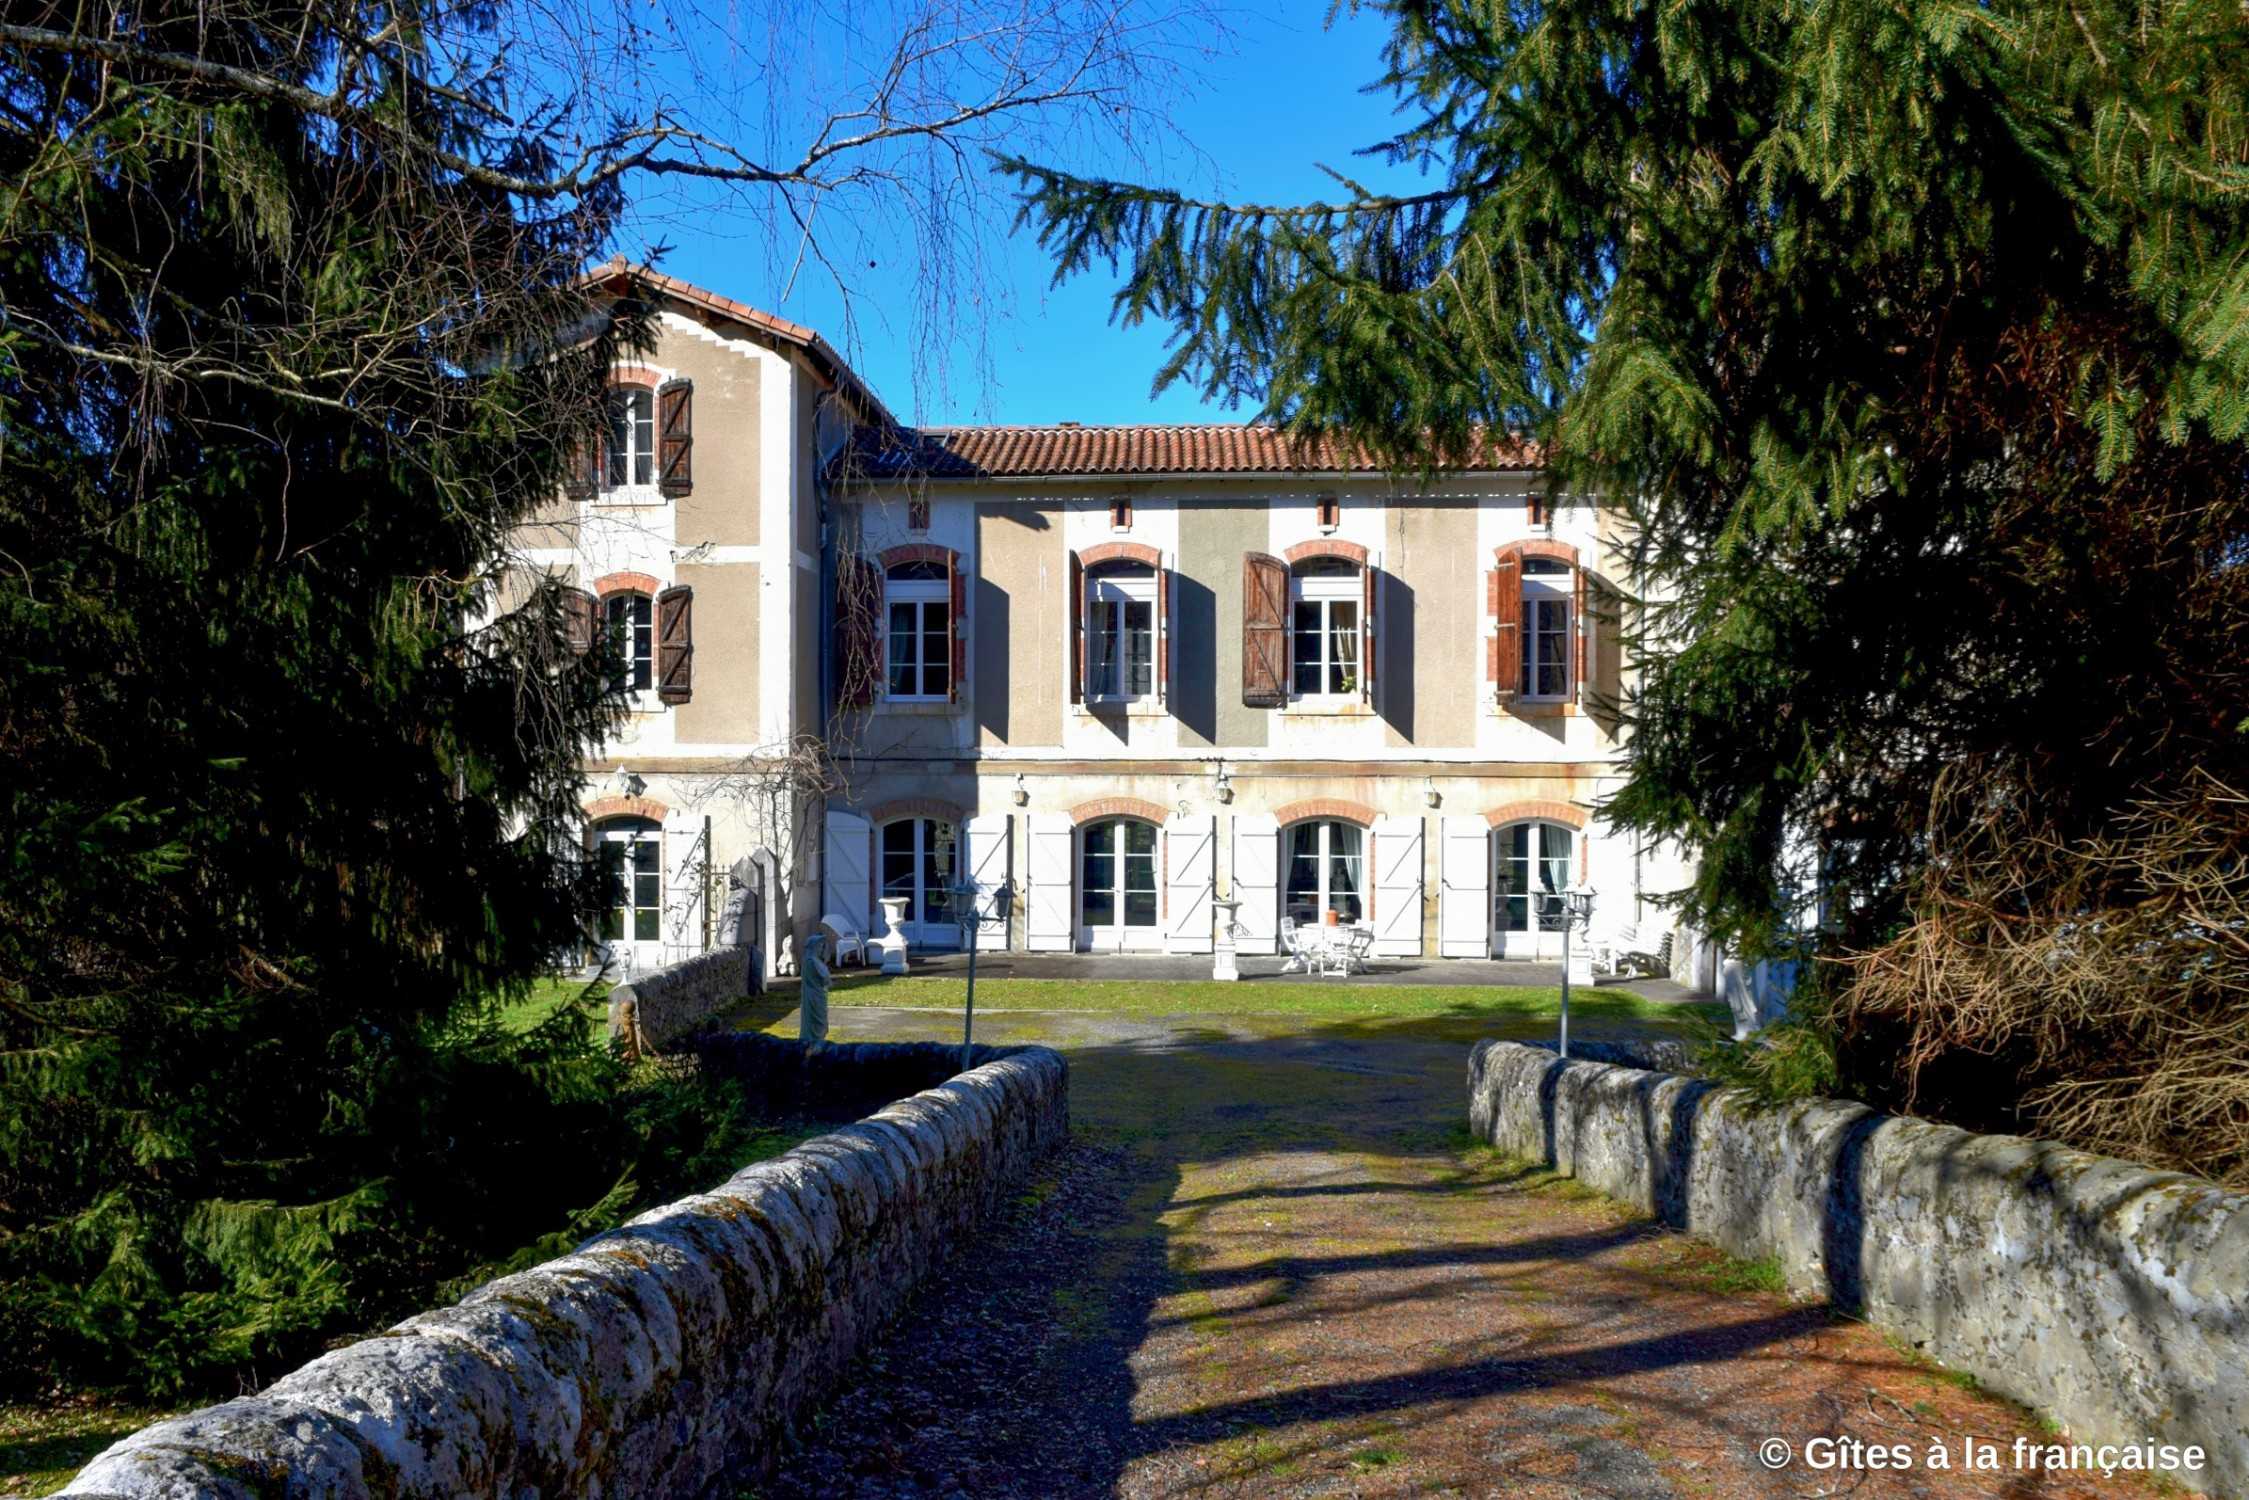 Bilder Historic school building in the Pyrenees - Vacation home / B&B